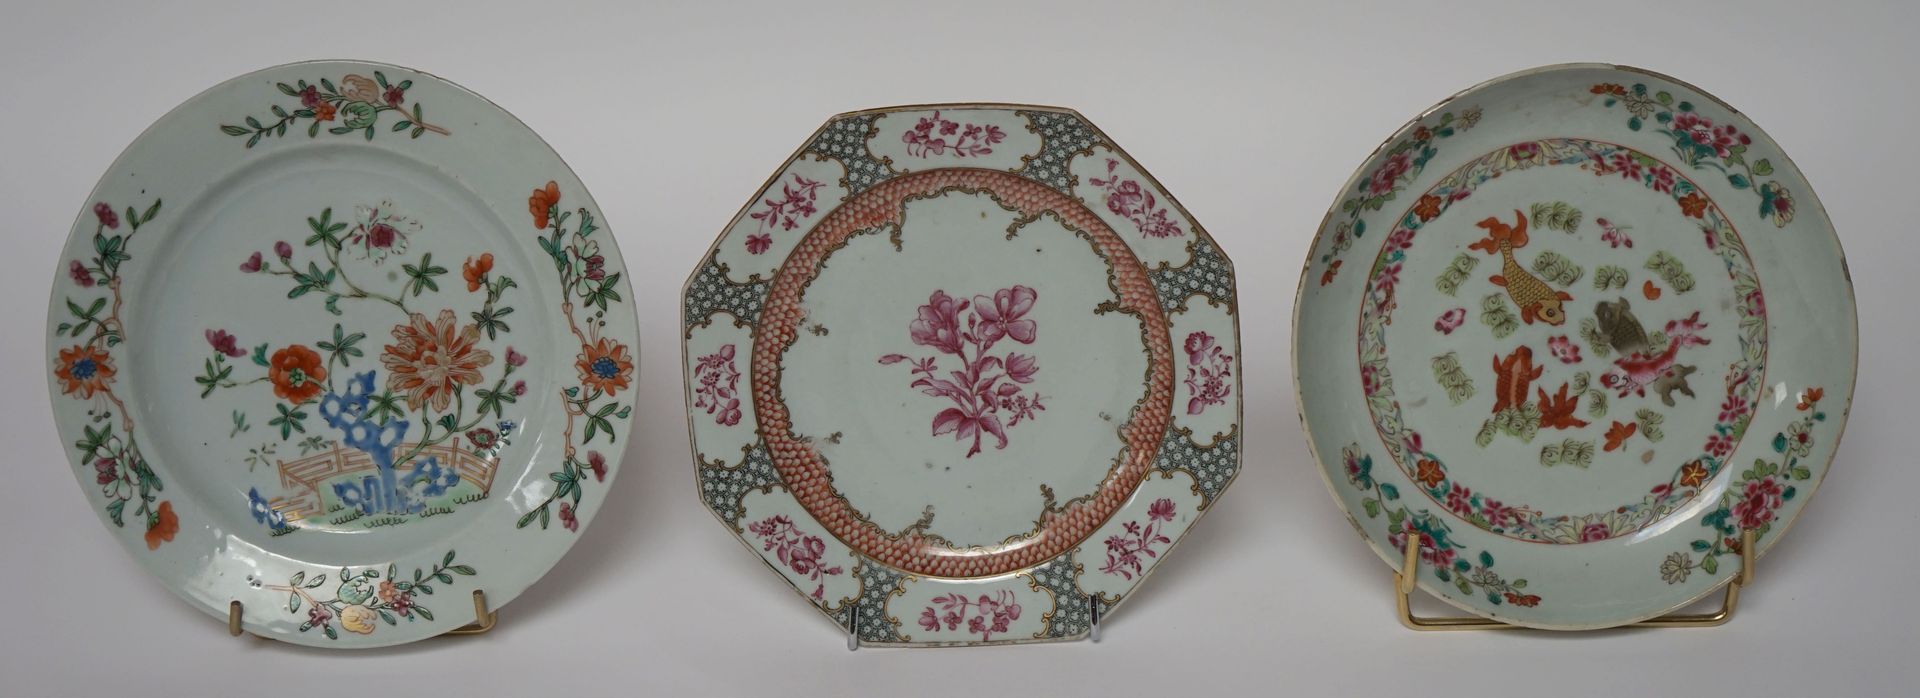 Null CHINA, 18th century. Three Compagnie des Indes plates, in polychrome enamel&hellip;